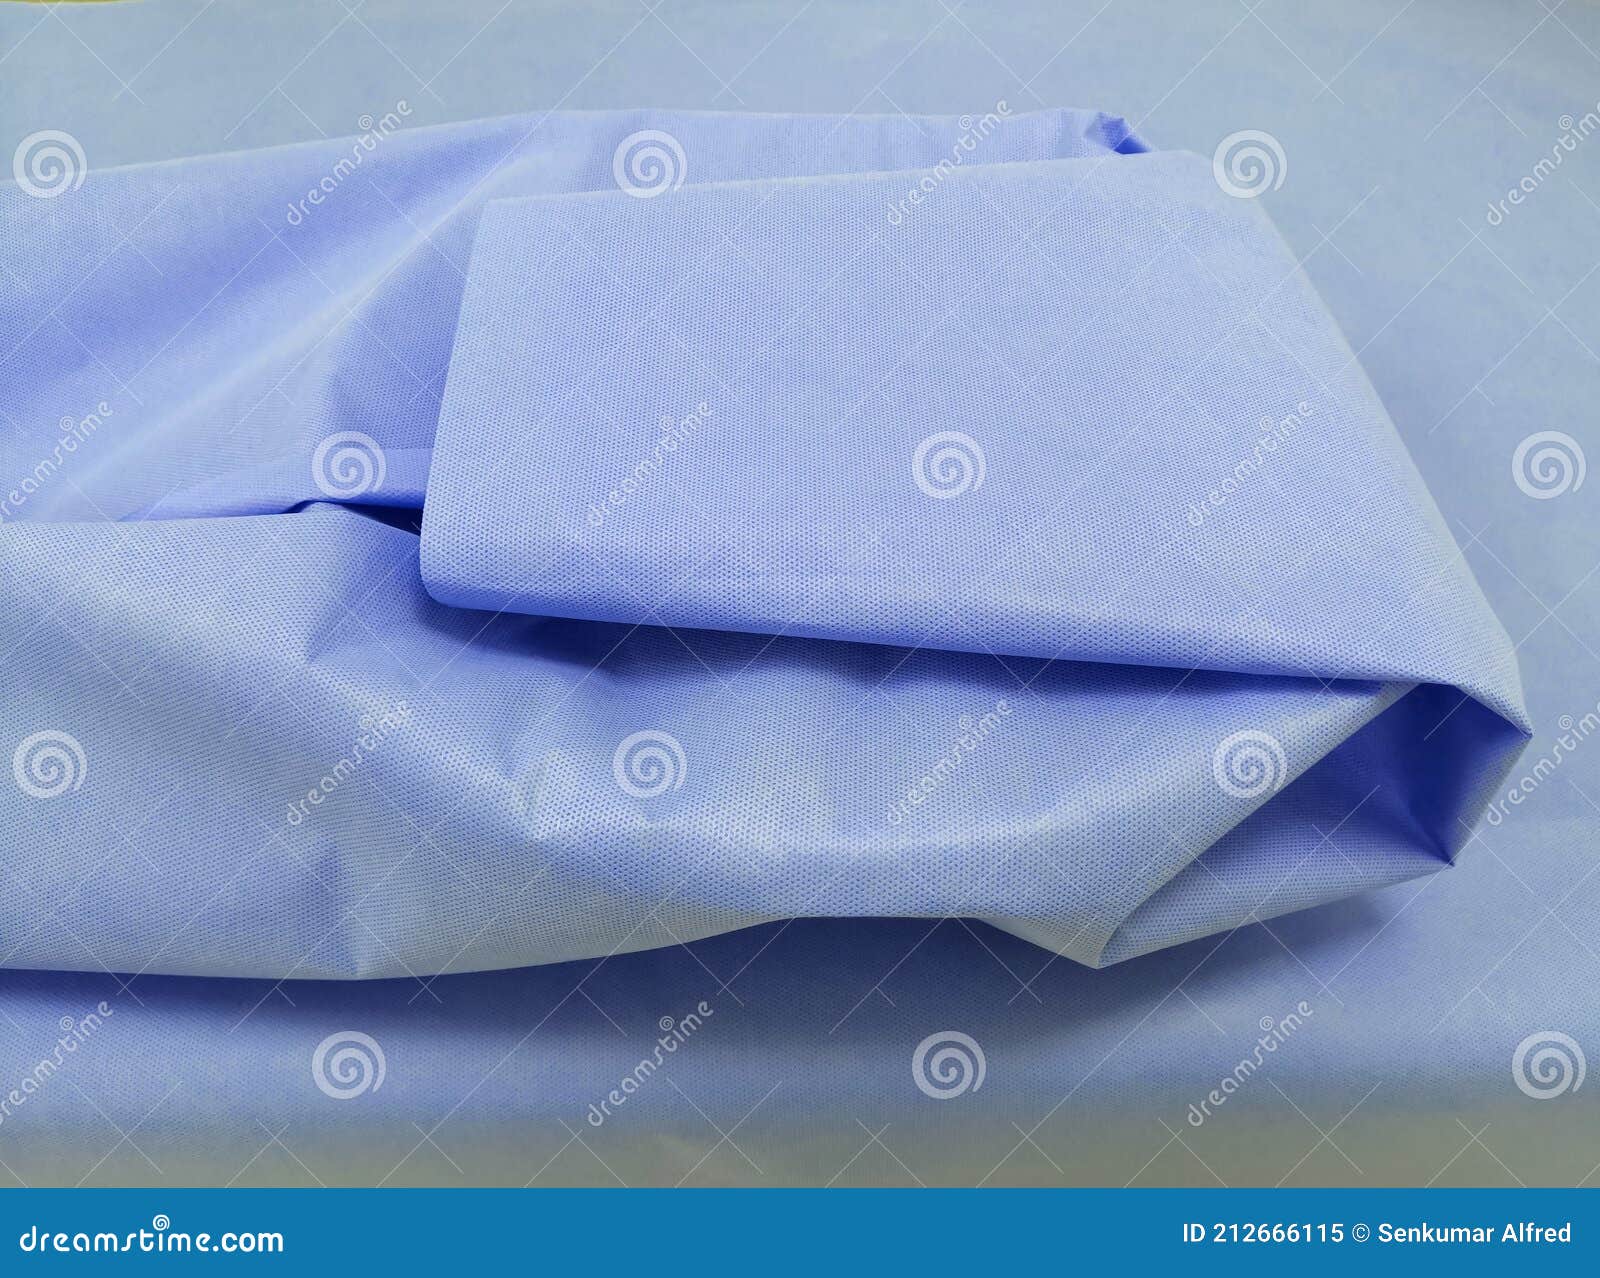 Packing of Surgical Instrument with Sterilization Blue Drape Stock ...